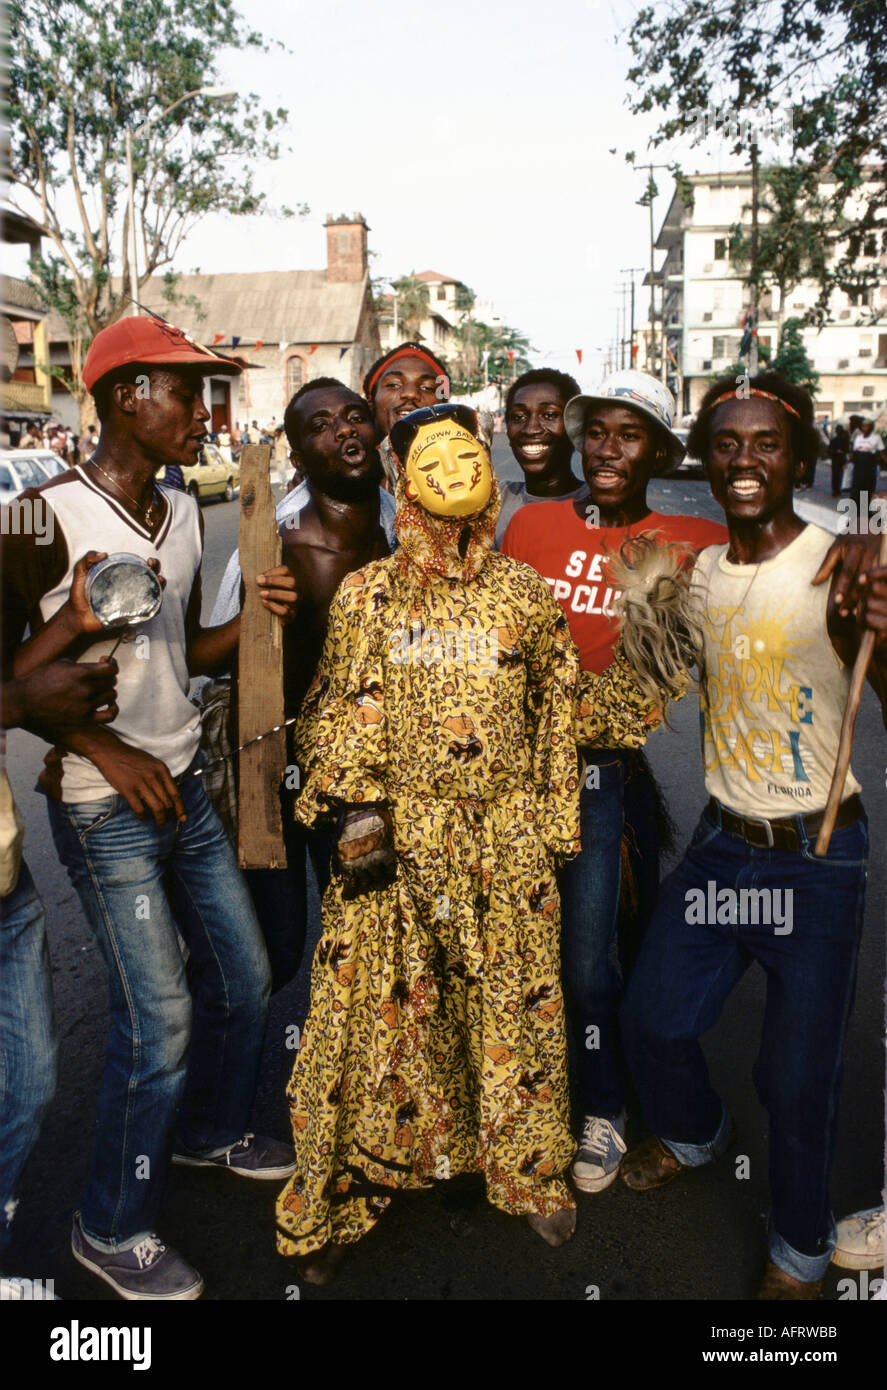 Liberia, Monrovia, National Redemption Day celebrations annually on 12th April. Group of men with costumed figure West Africa. 1983 1980s HOMER SYKES Stock Photo